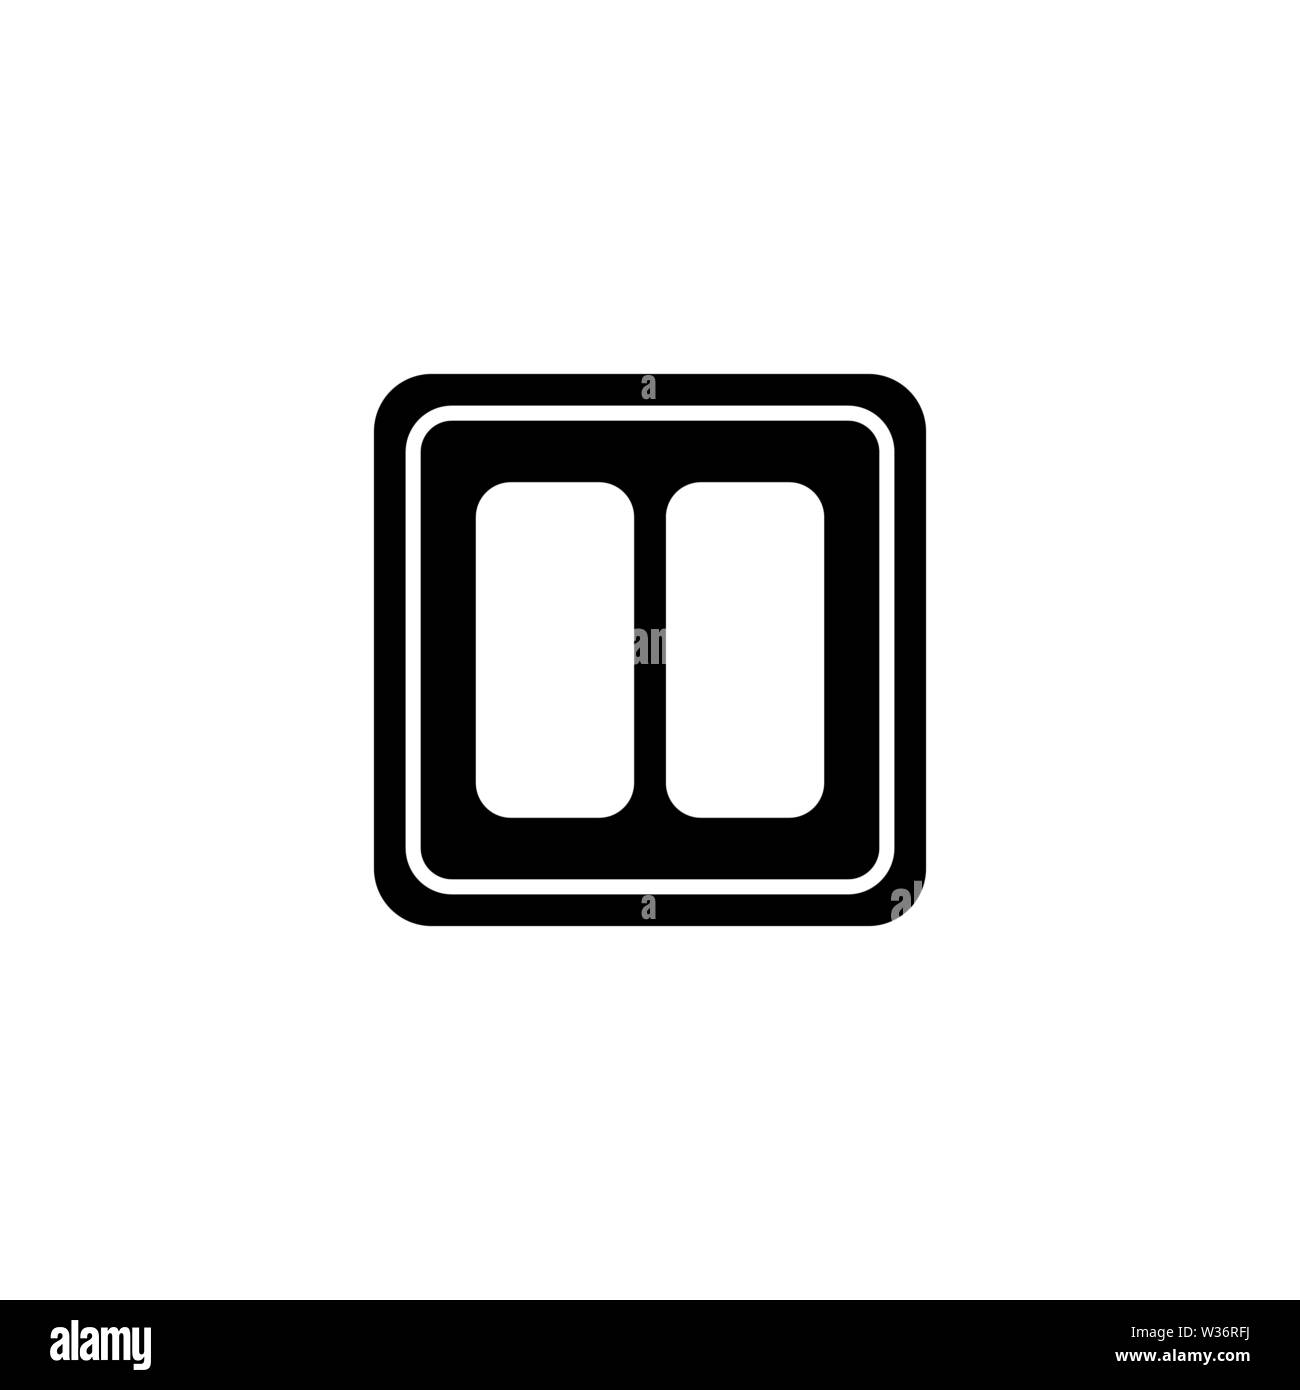 Electric Light Switch. Flat Vector Icon illustration. Simple black ...